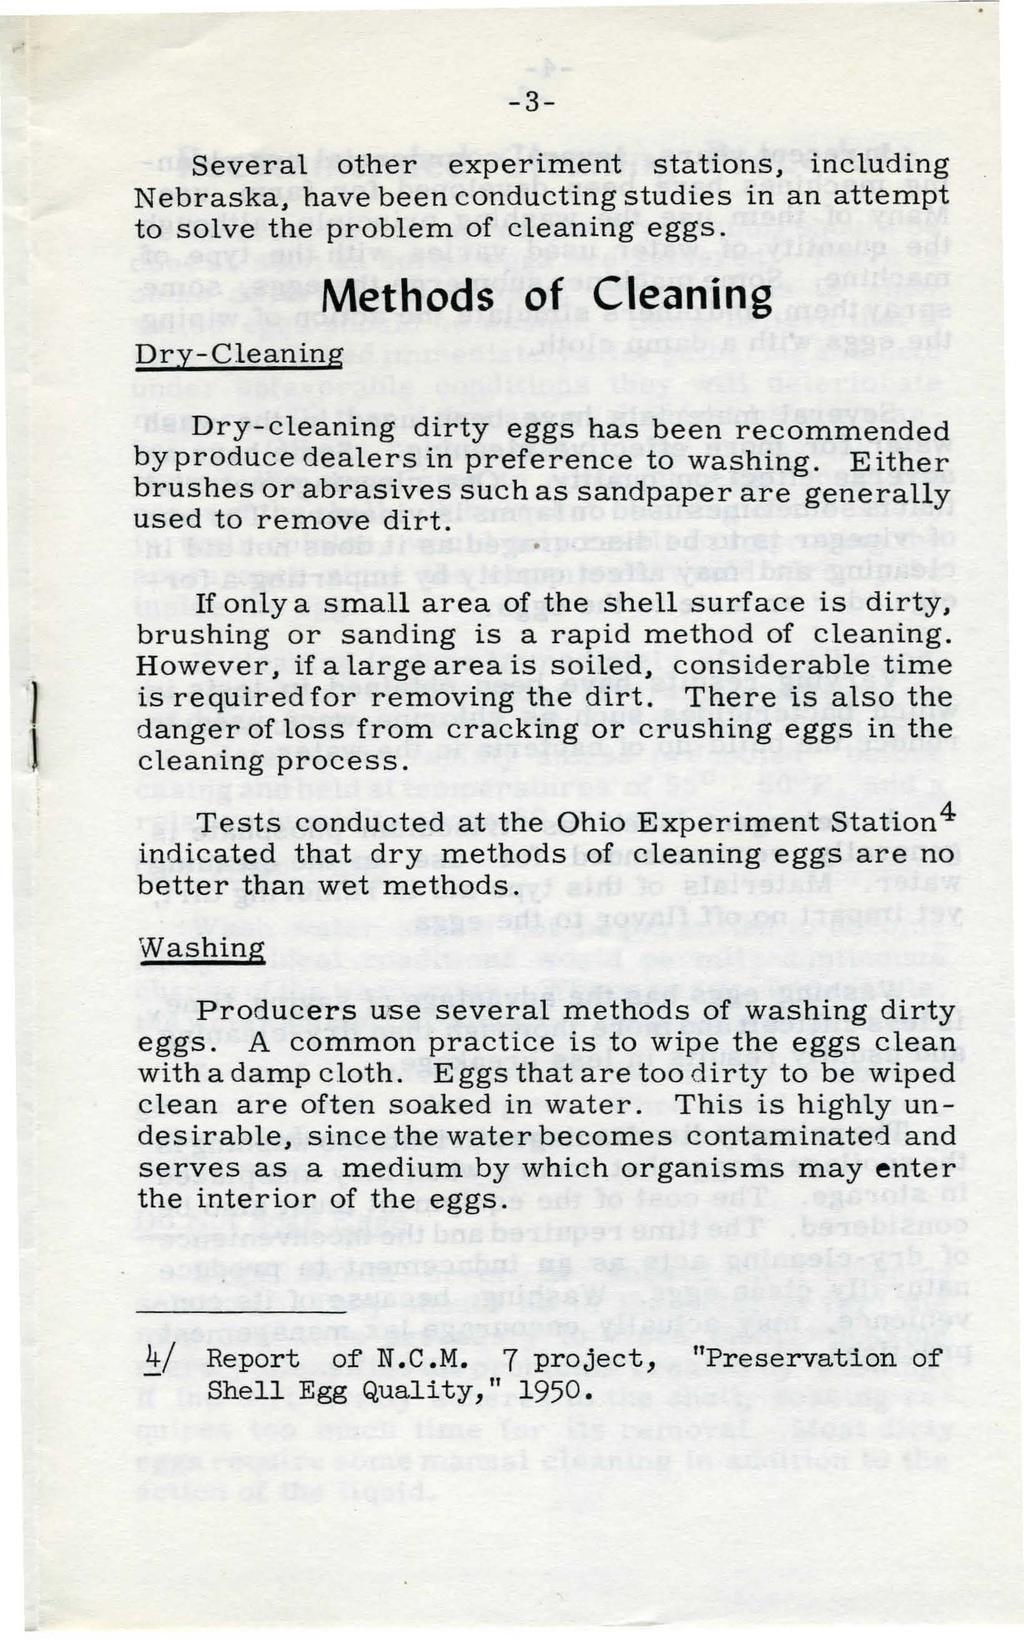 -3- Several other experiment stations, including Nebraska, have been conducting studies in an attempt to solve the problem of cleaning eggs.